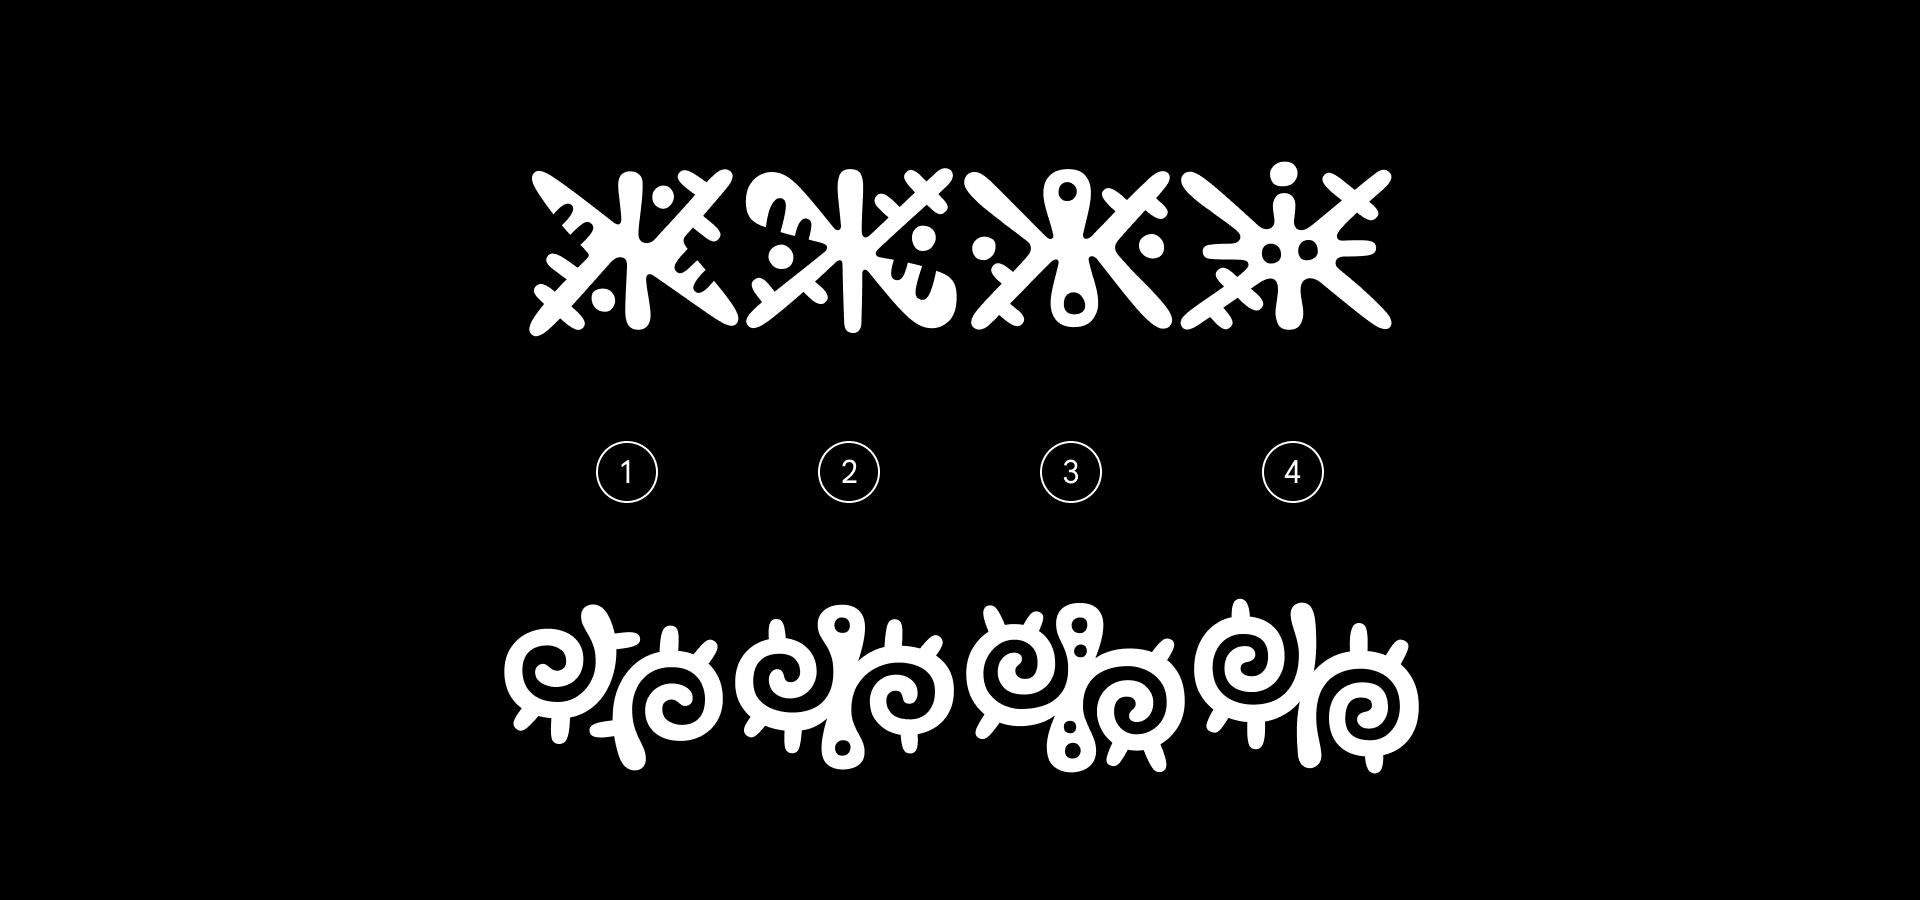 Comparison of two Cyrillic characters in four Kablammo styles